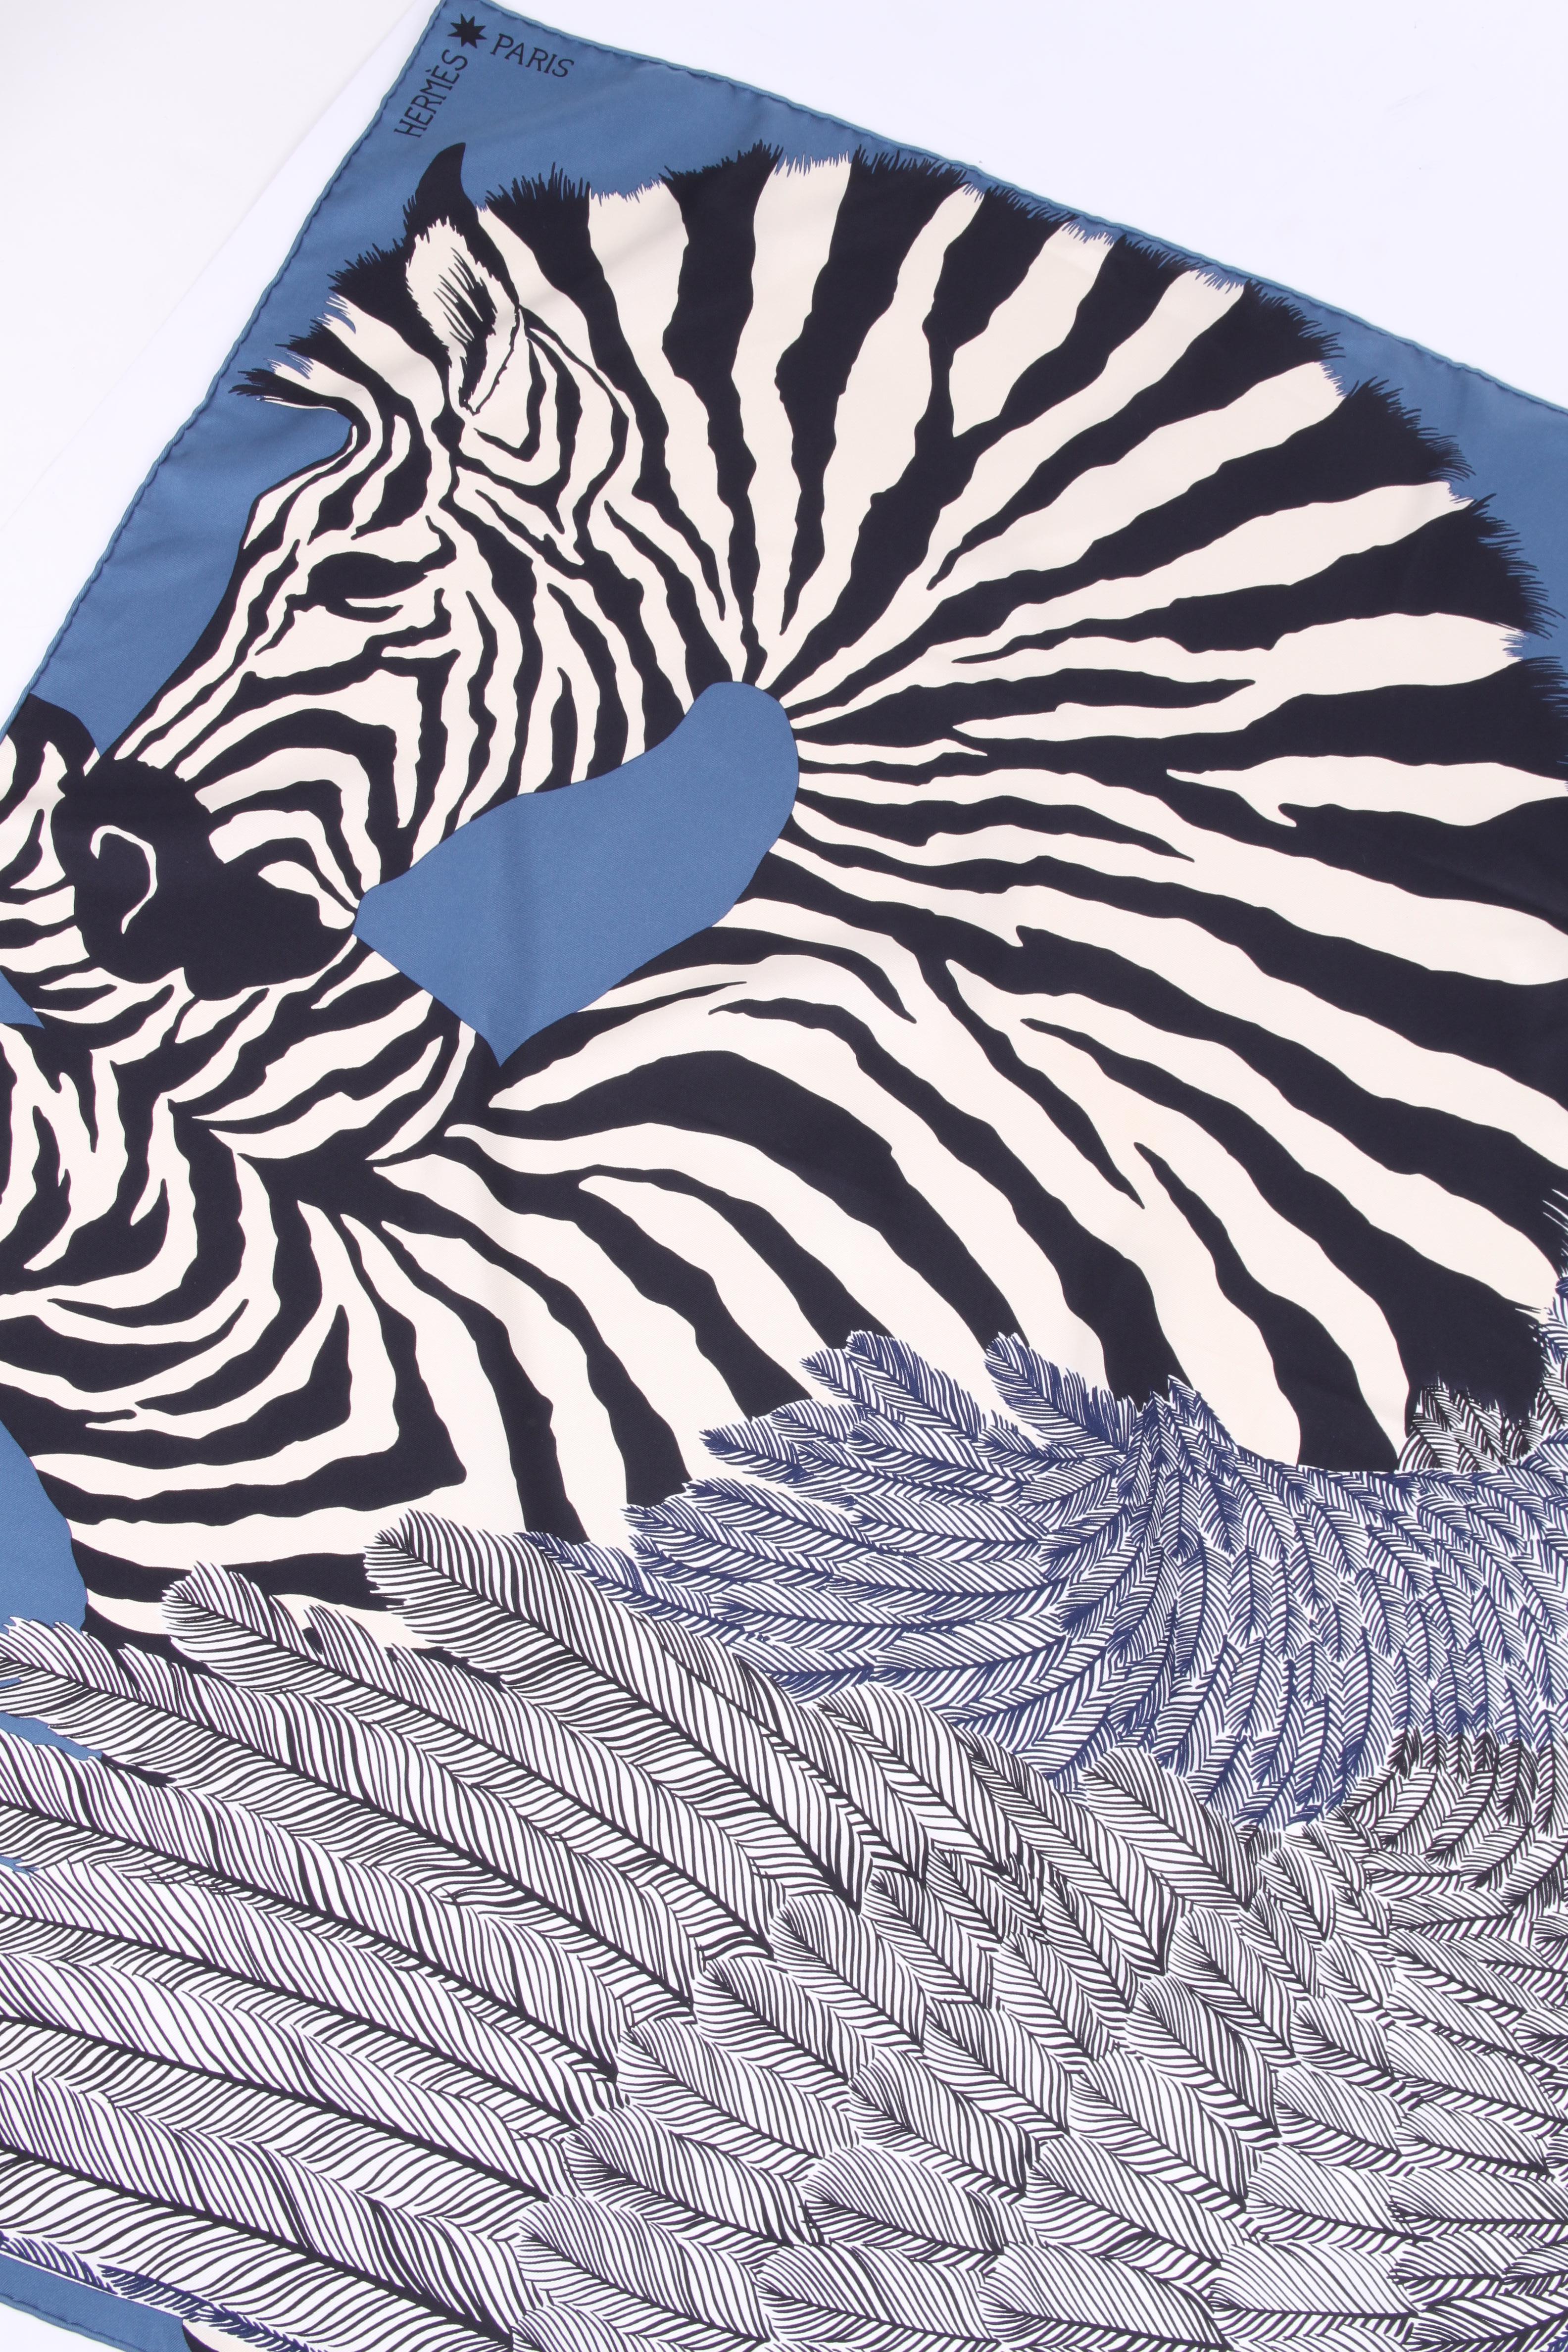 This marvellous silk scarf by Hermes is covered with a zebra print on a blue foundation.

Name: Zebra Pegasus
Measurements: 90 x 90 centimeters
Colors: blue, black, white
Material: silk
Condition: like new (9,5/10)

Made in France.